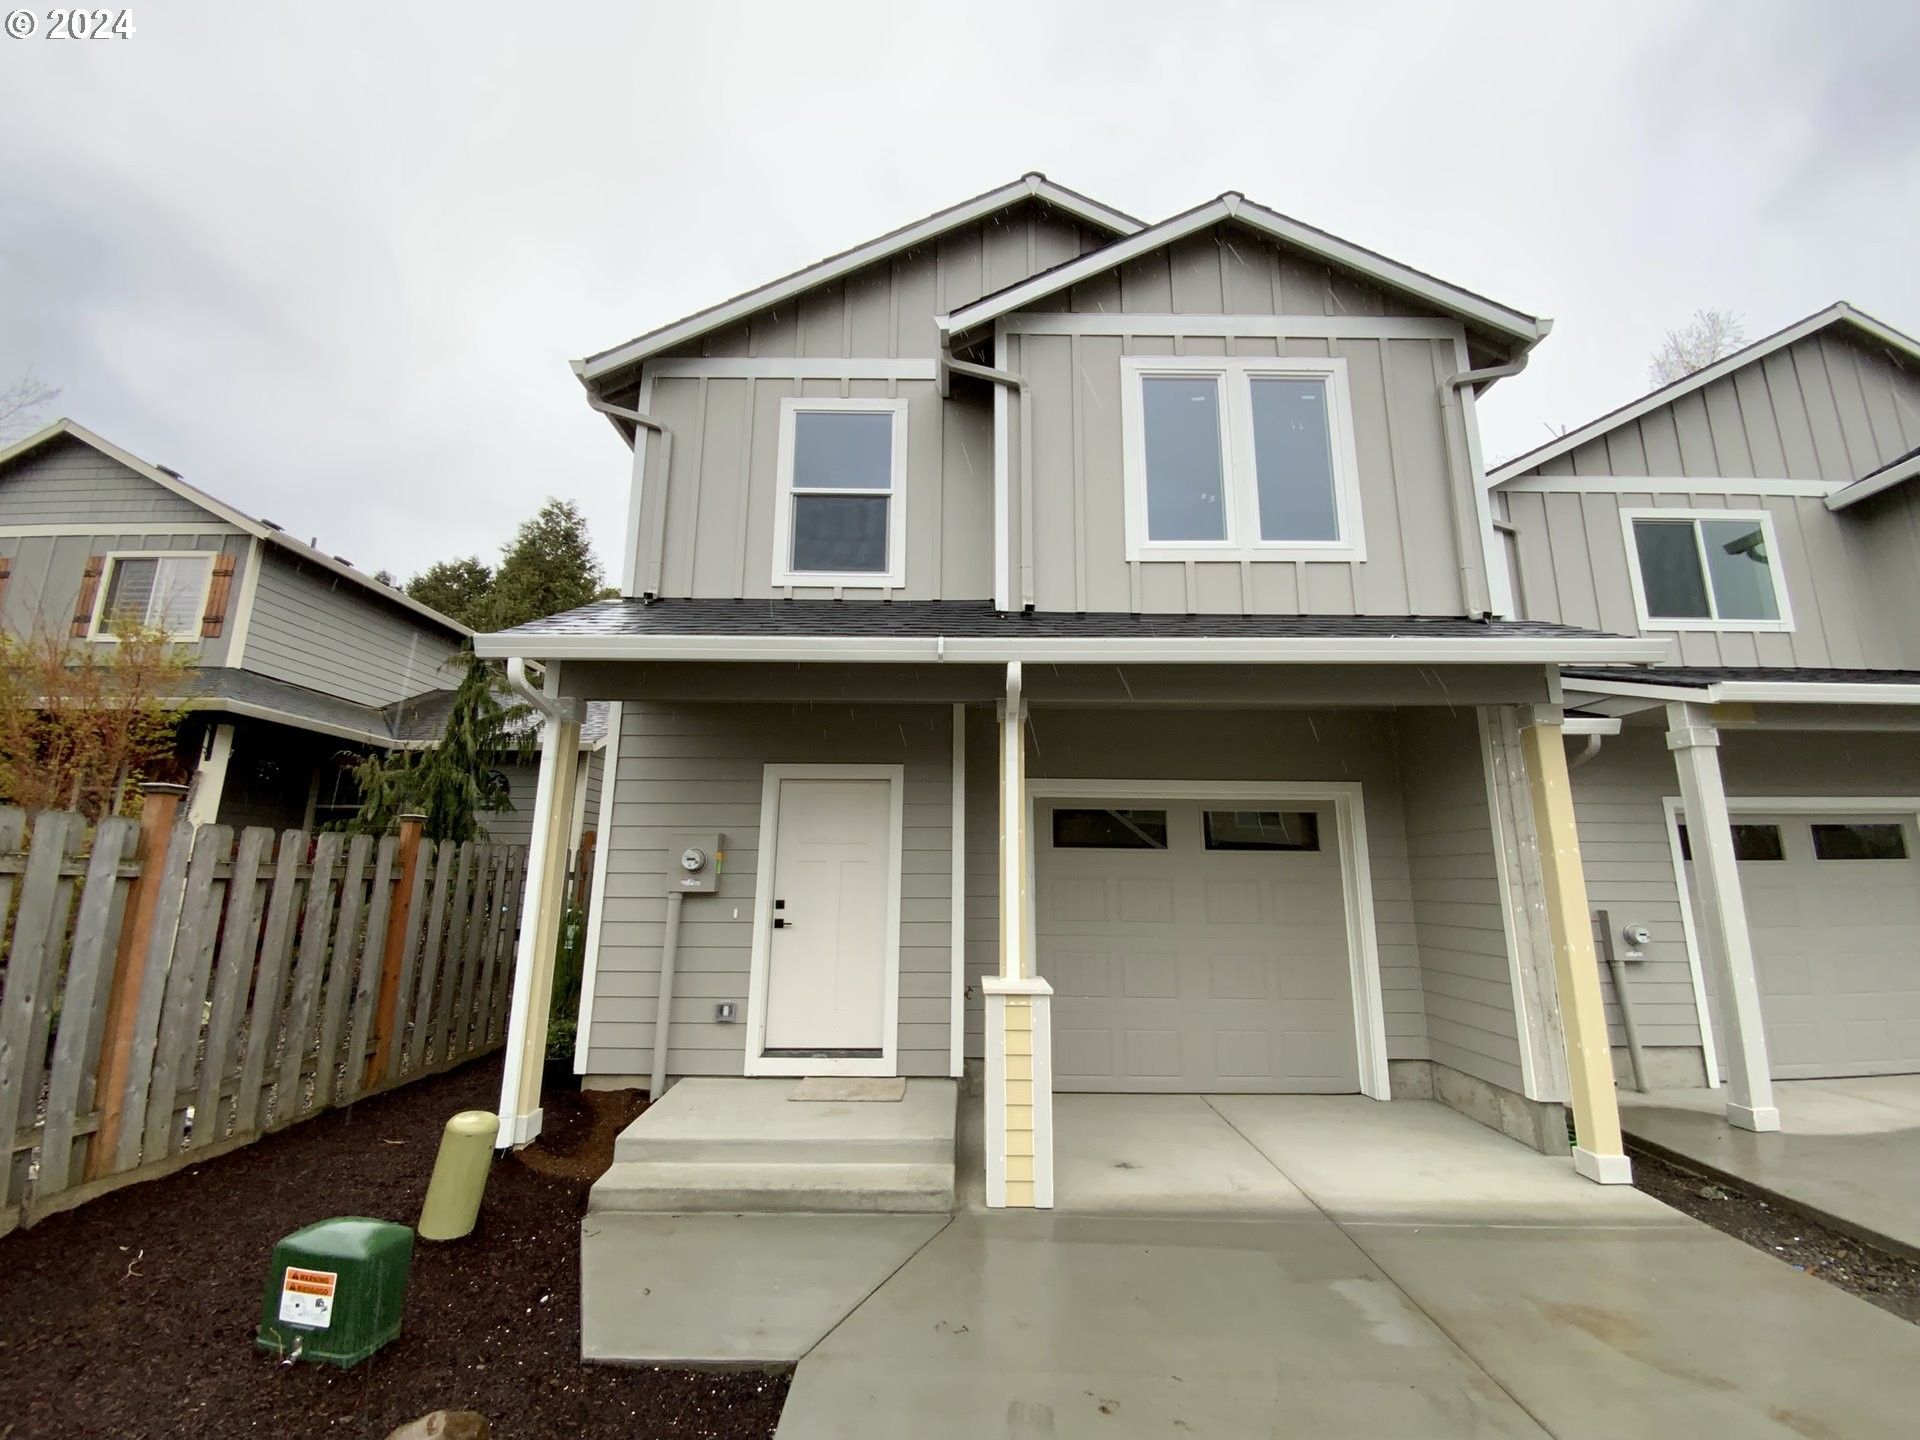 1024 Sw Halsey St. Troutdale, OR 97060